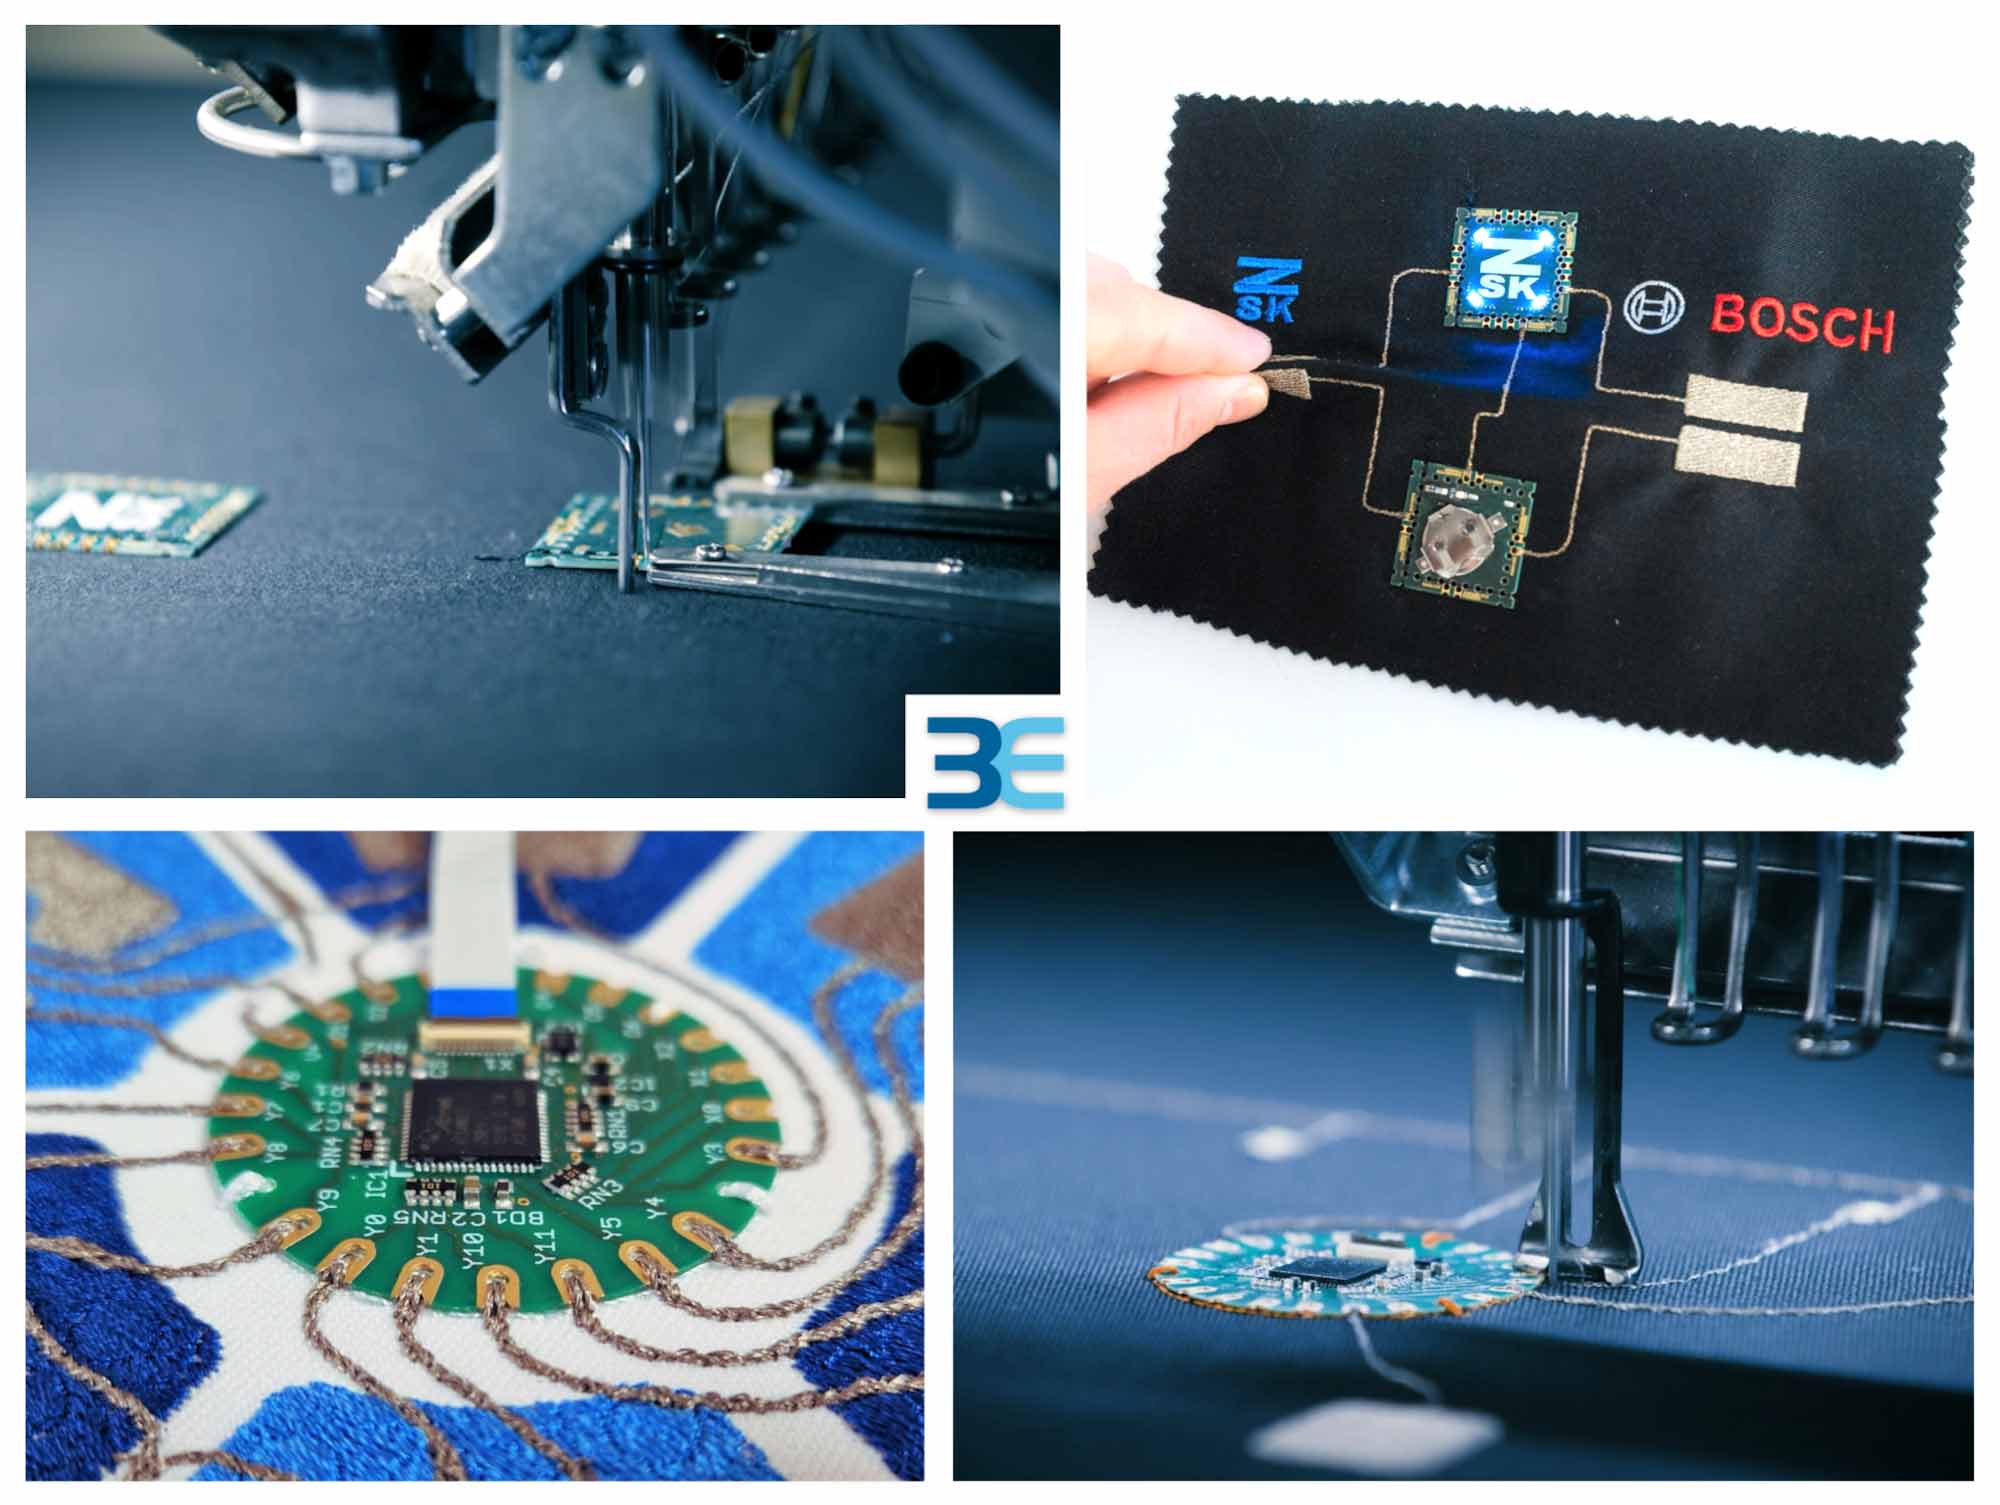 Workshop 3: Introduction to Microcontrollers and PCB Integration into Textiles